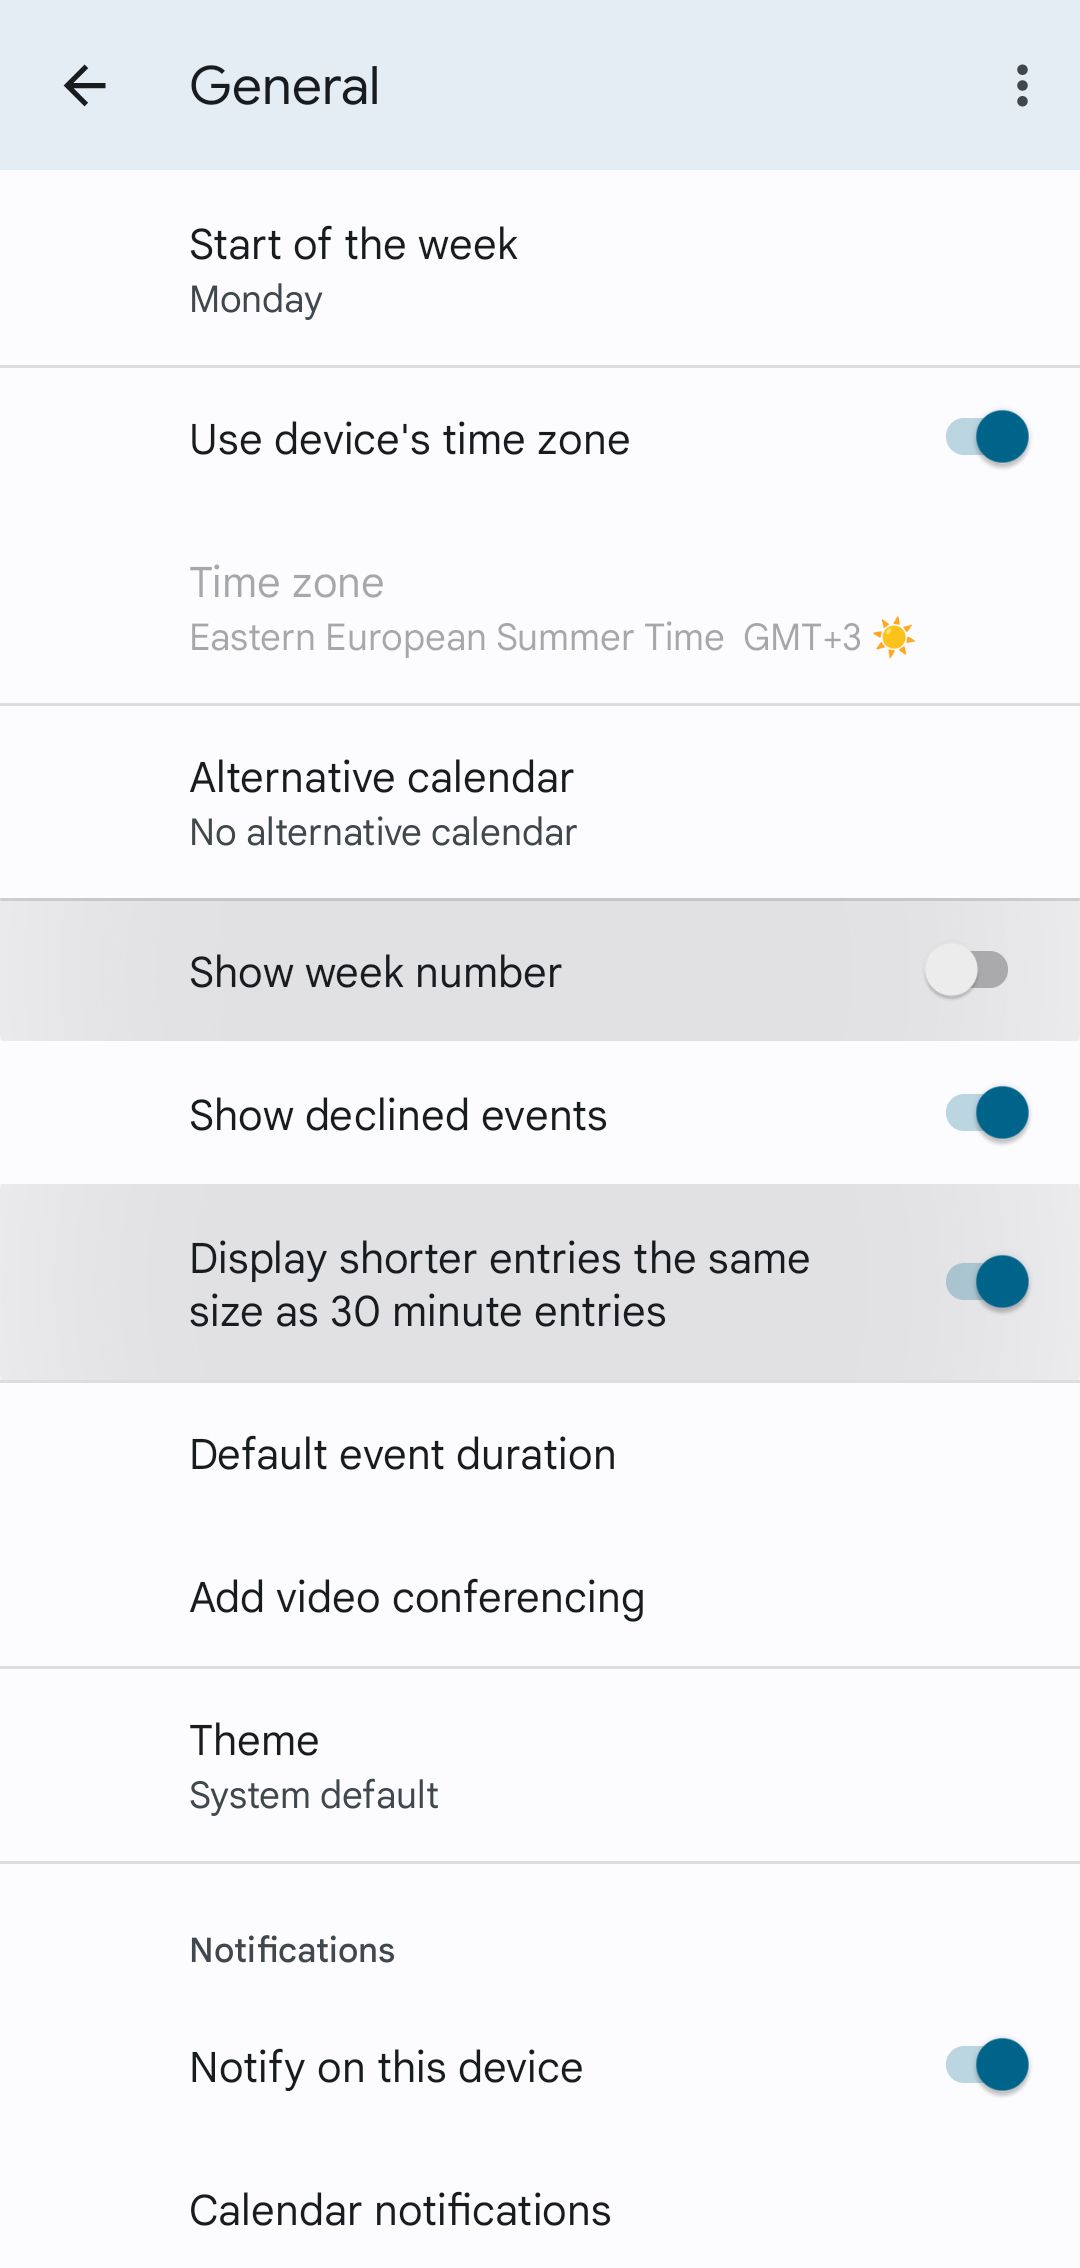 12 Useful Tips for Using Google Calendar on Android